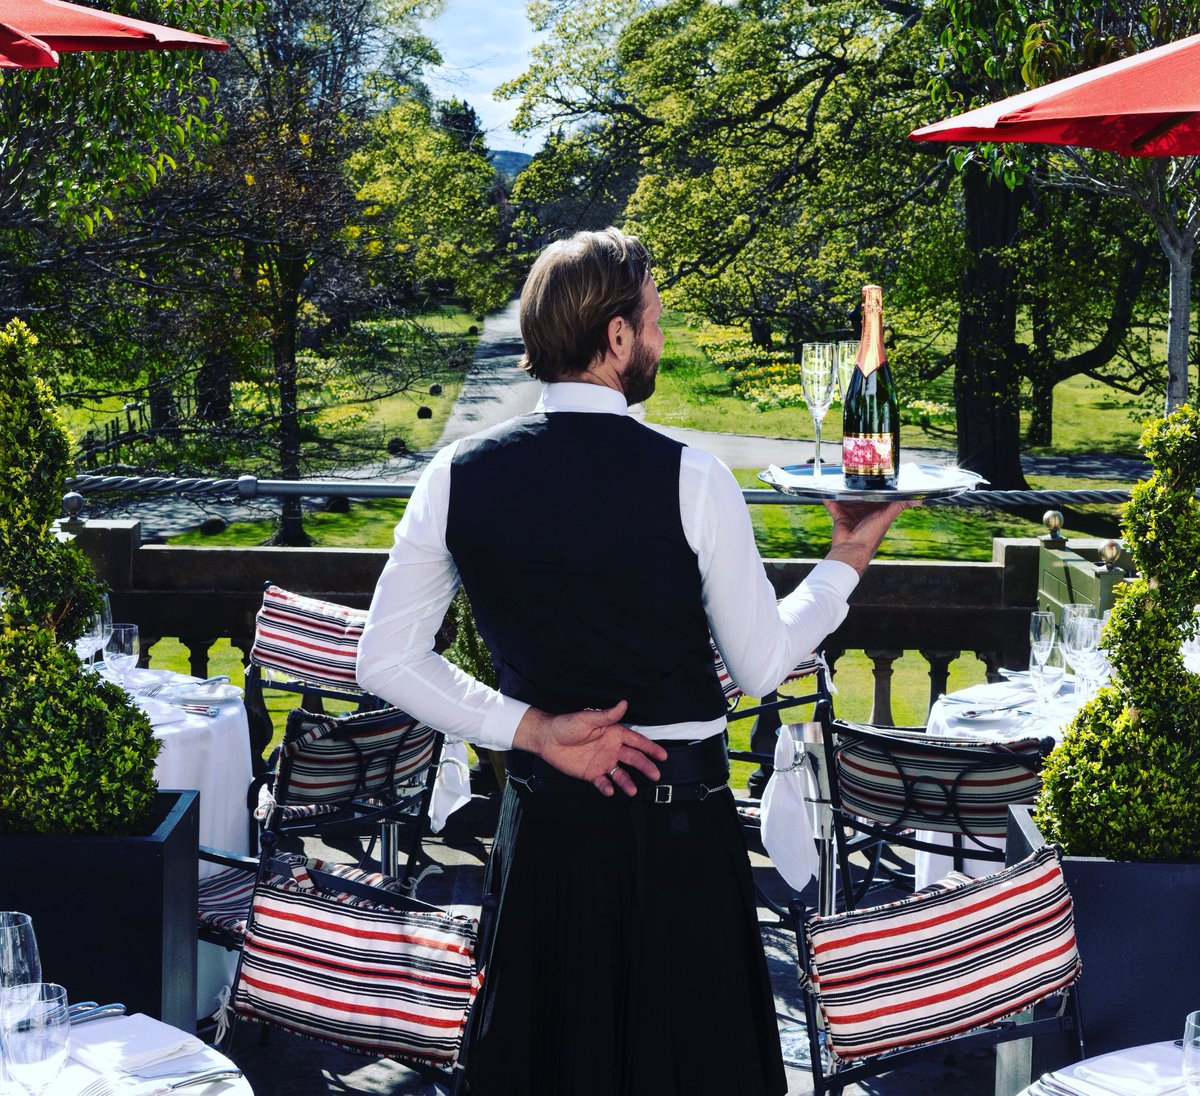 Looking forward to a busy Sunday with Champagne on the terrace 🥂#champagnelunch #prestonfield #champagne #prestonfieldhouse #edinburgh #visitscotland #edinburghlife #sundaylunch #prestonfieldchampagne